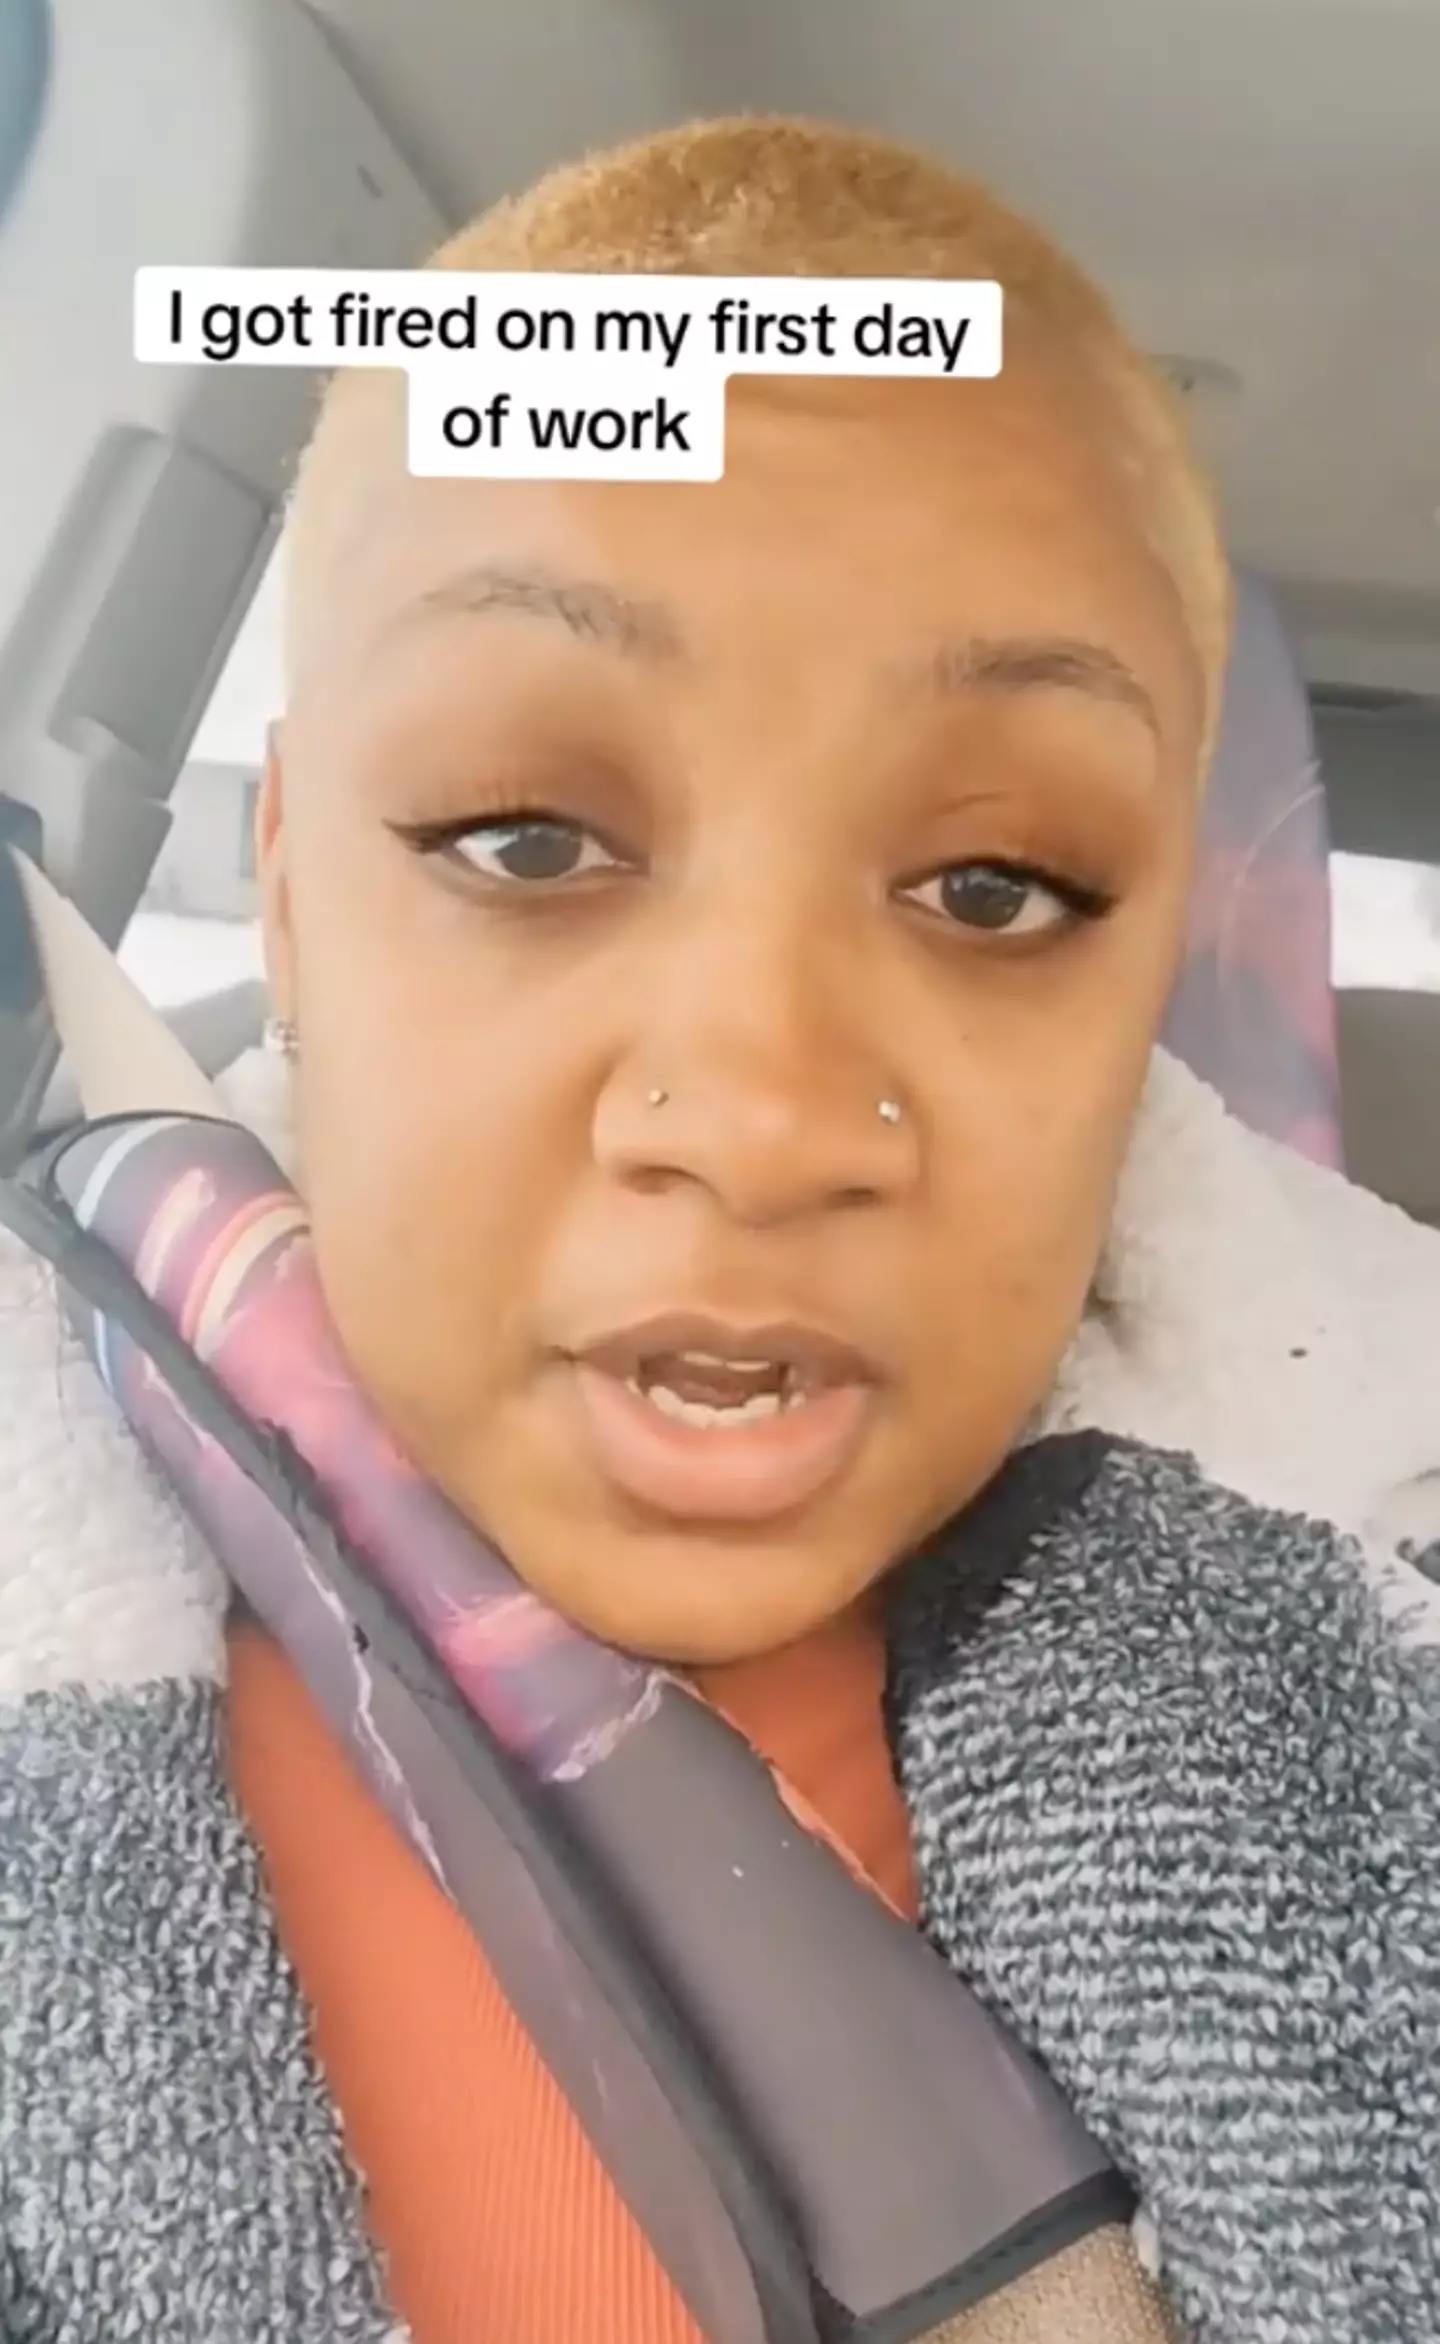 The woman took to TikTok to open up about the ordeal.